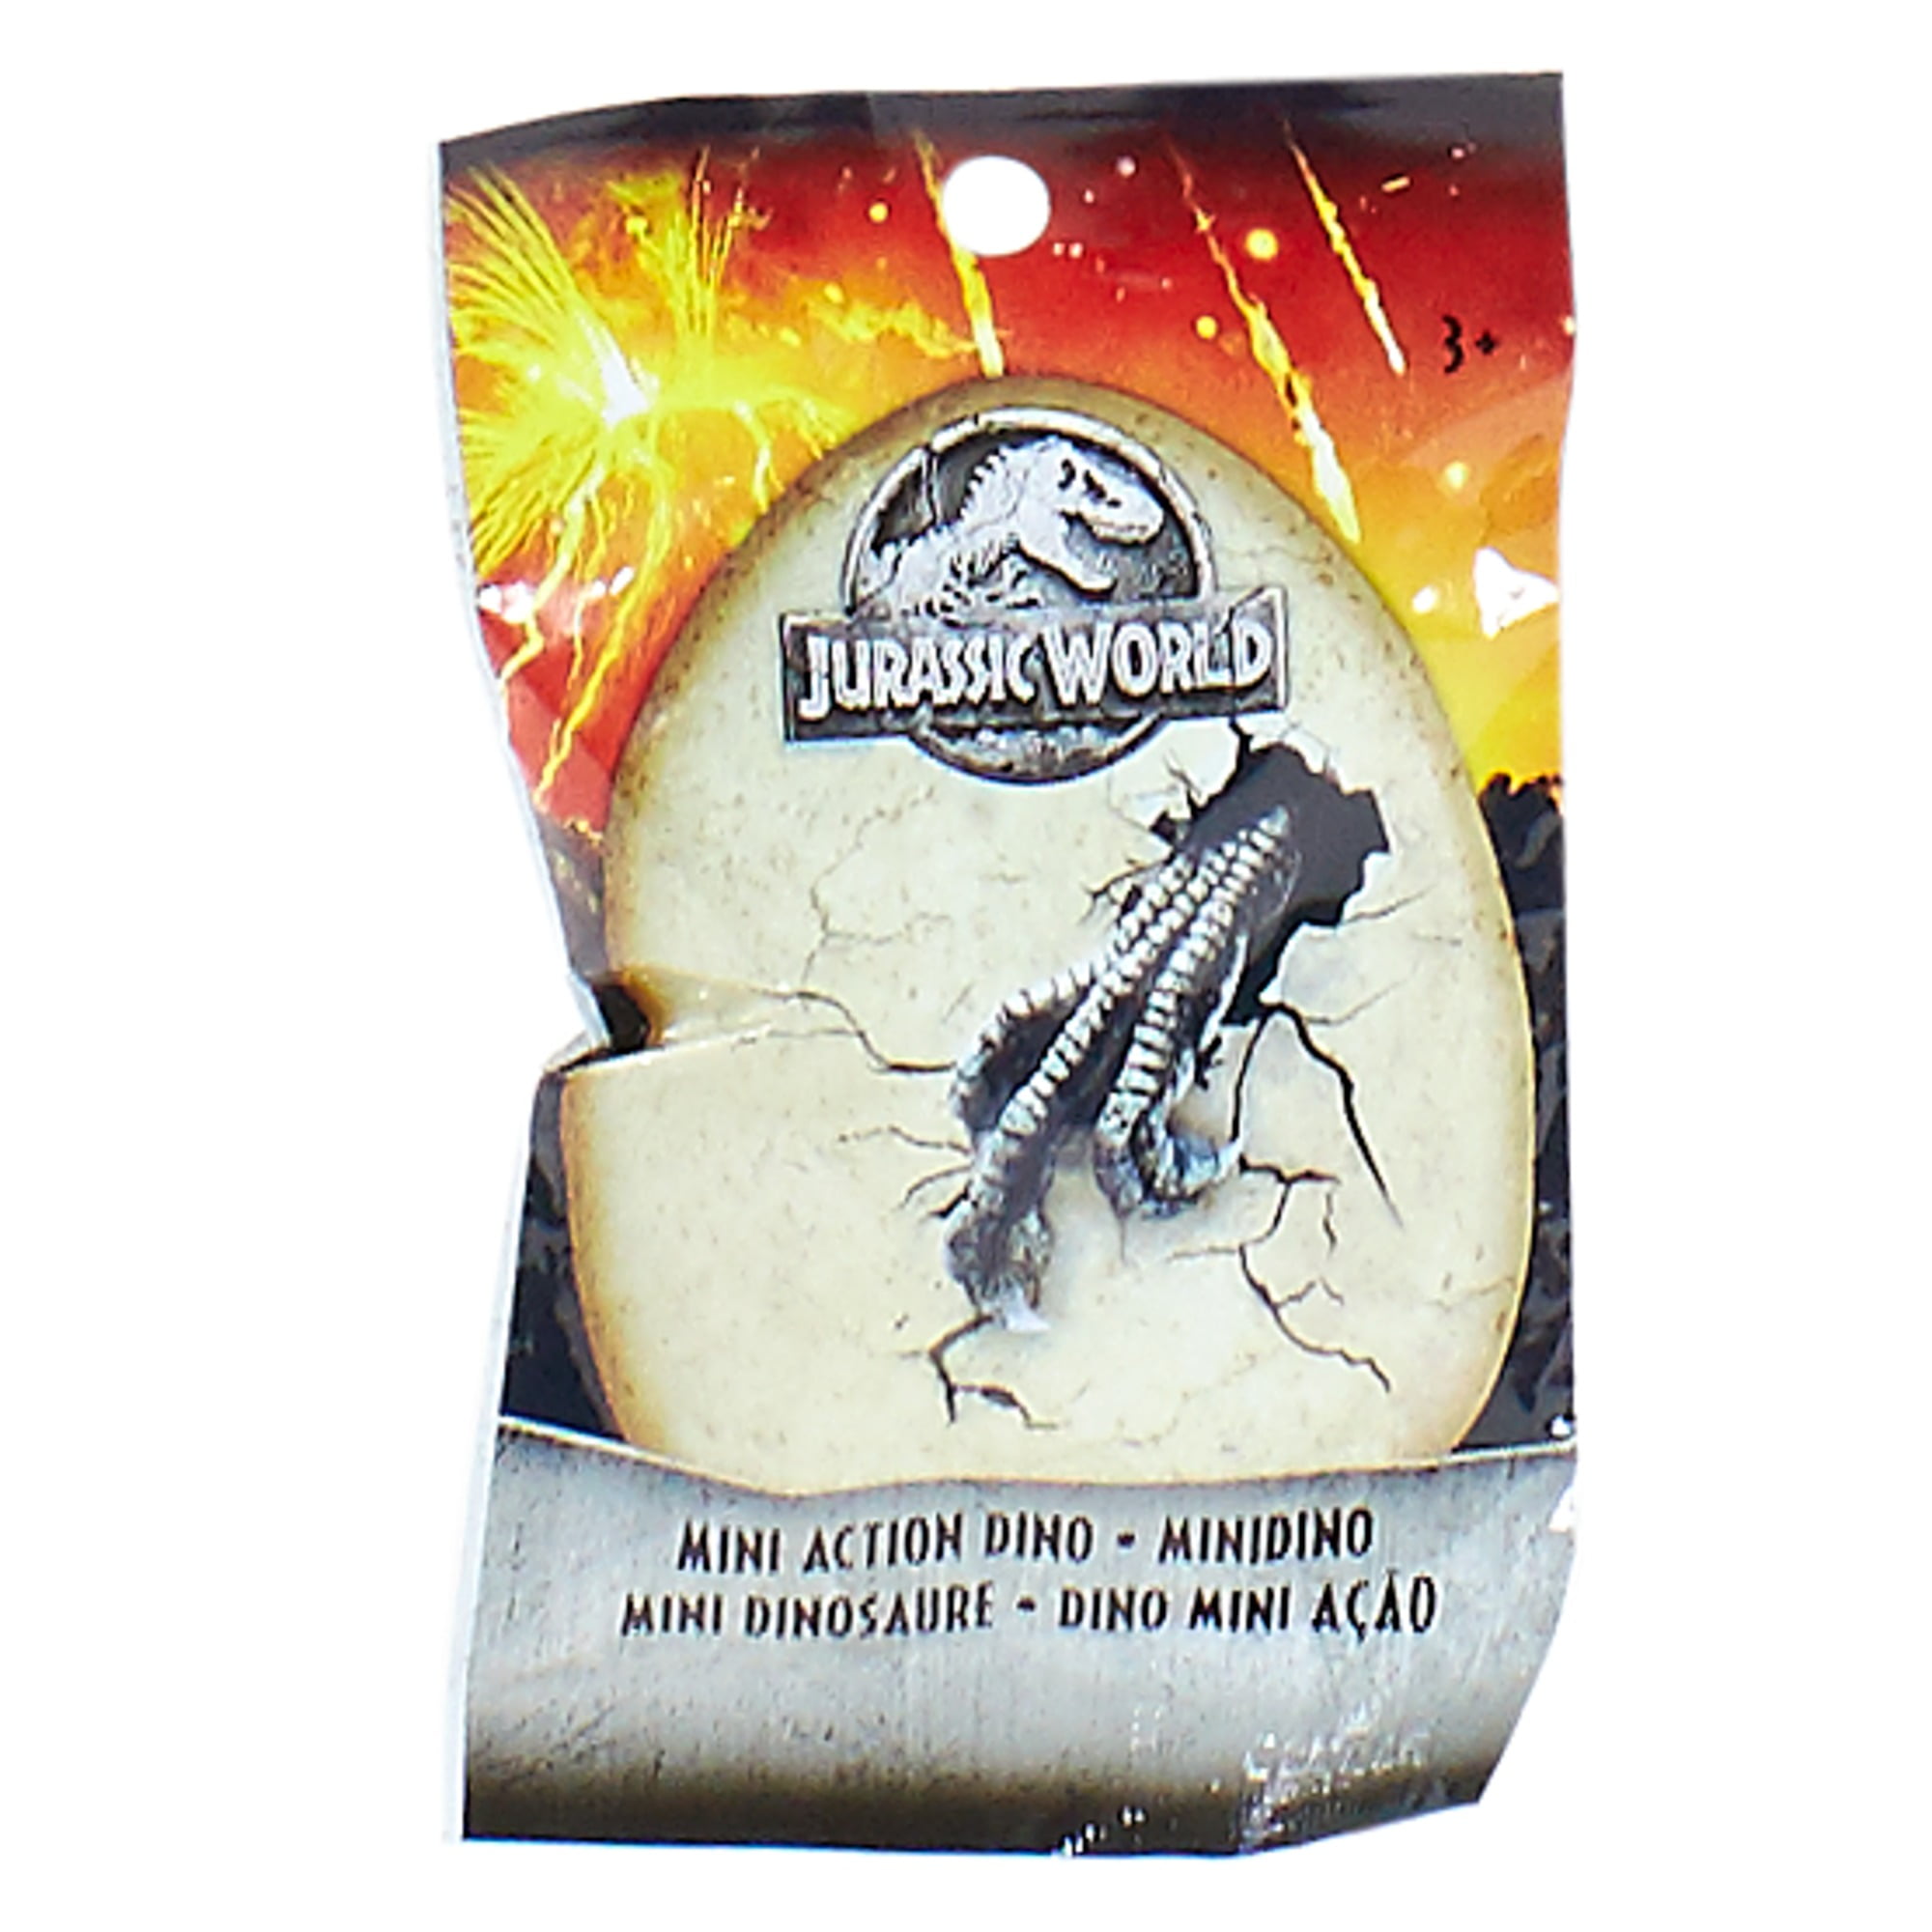 Jurassic World Mini Dinosaur Action Figure with 1 or 2 Movable Joints Iconic to Its Species, Realistic Sculpting & Decoration, Great Collectible Gift Ages 4 Years Old & Up